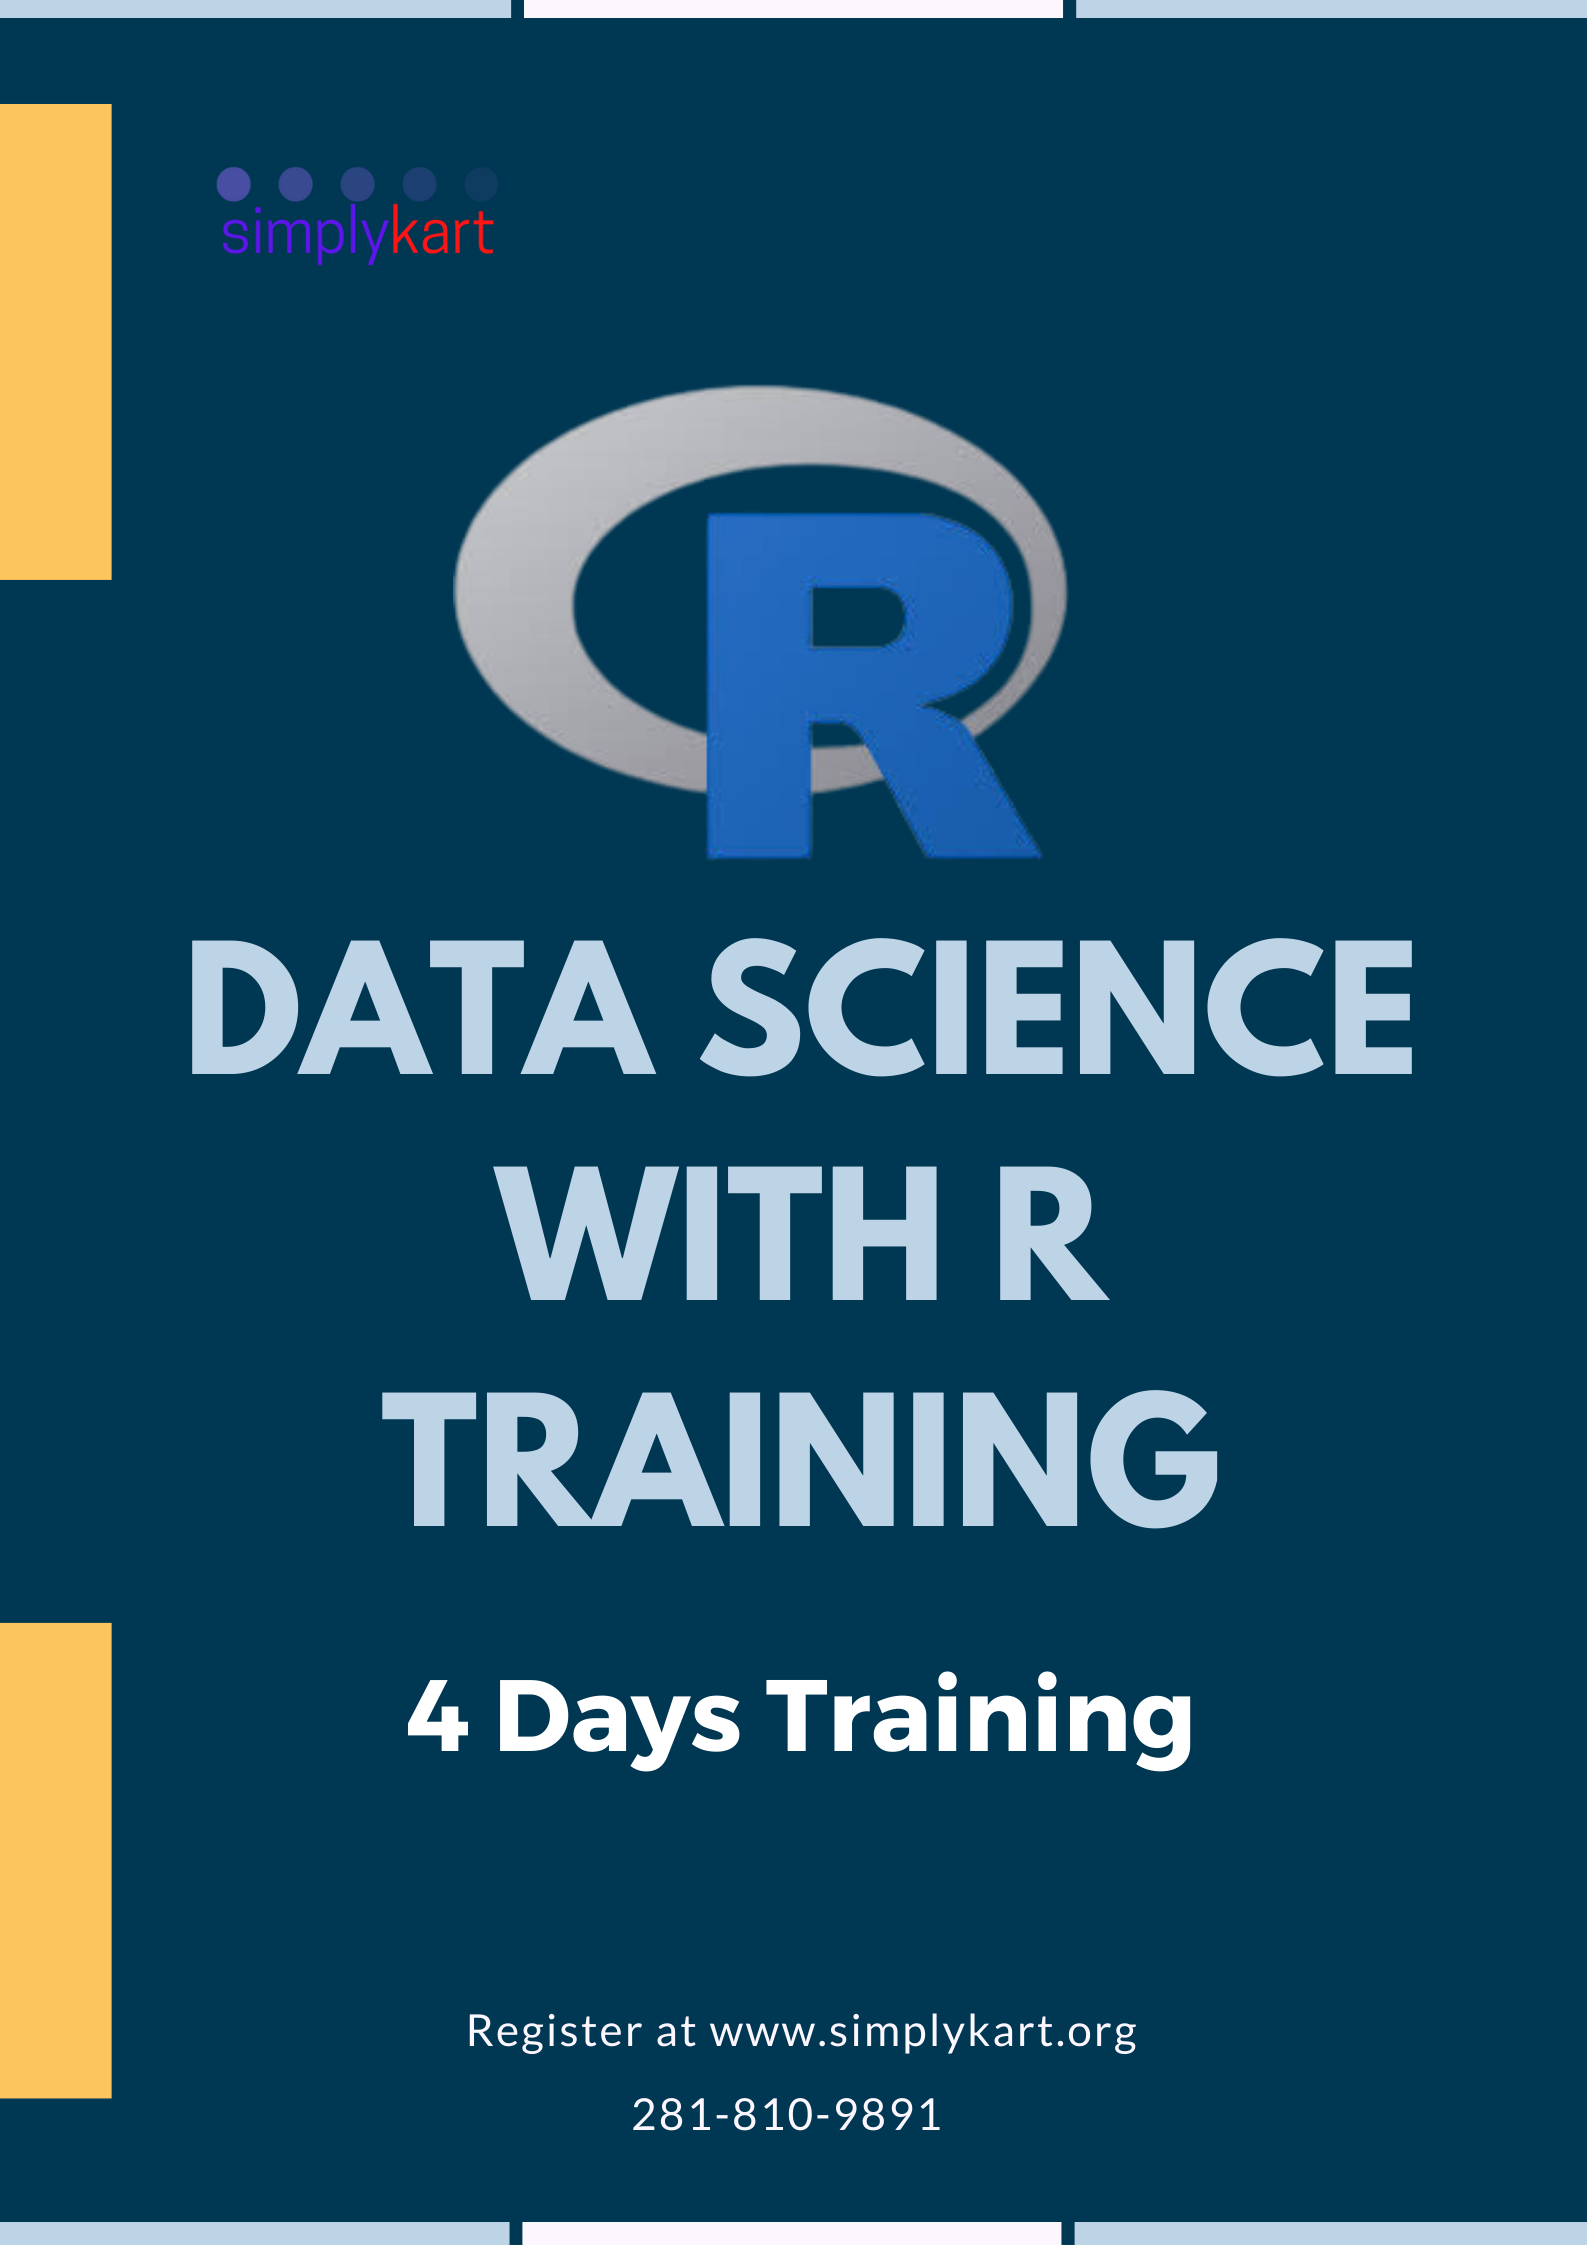 DATA SCIENCE WITH R TRAINING